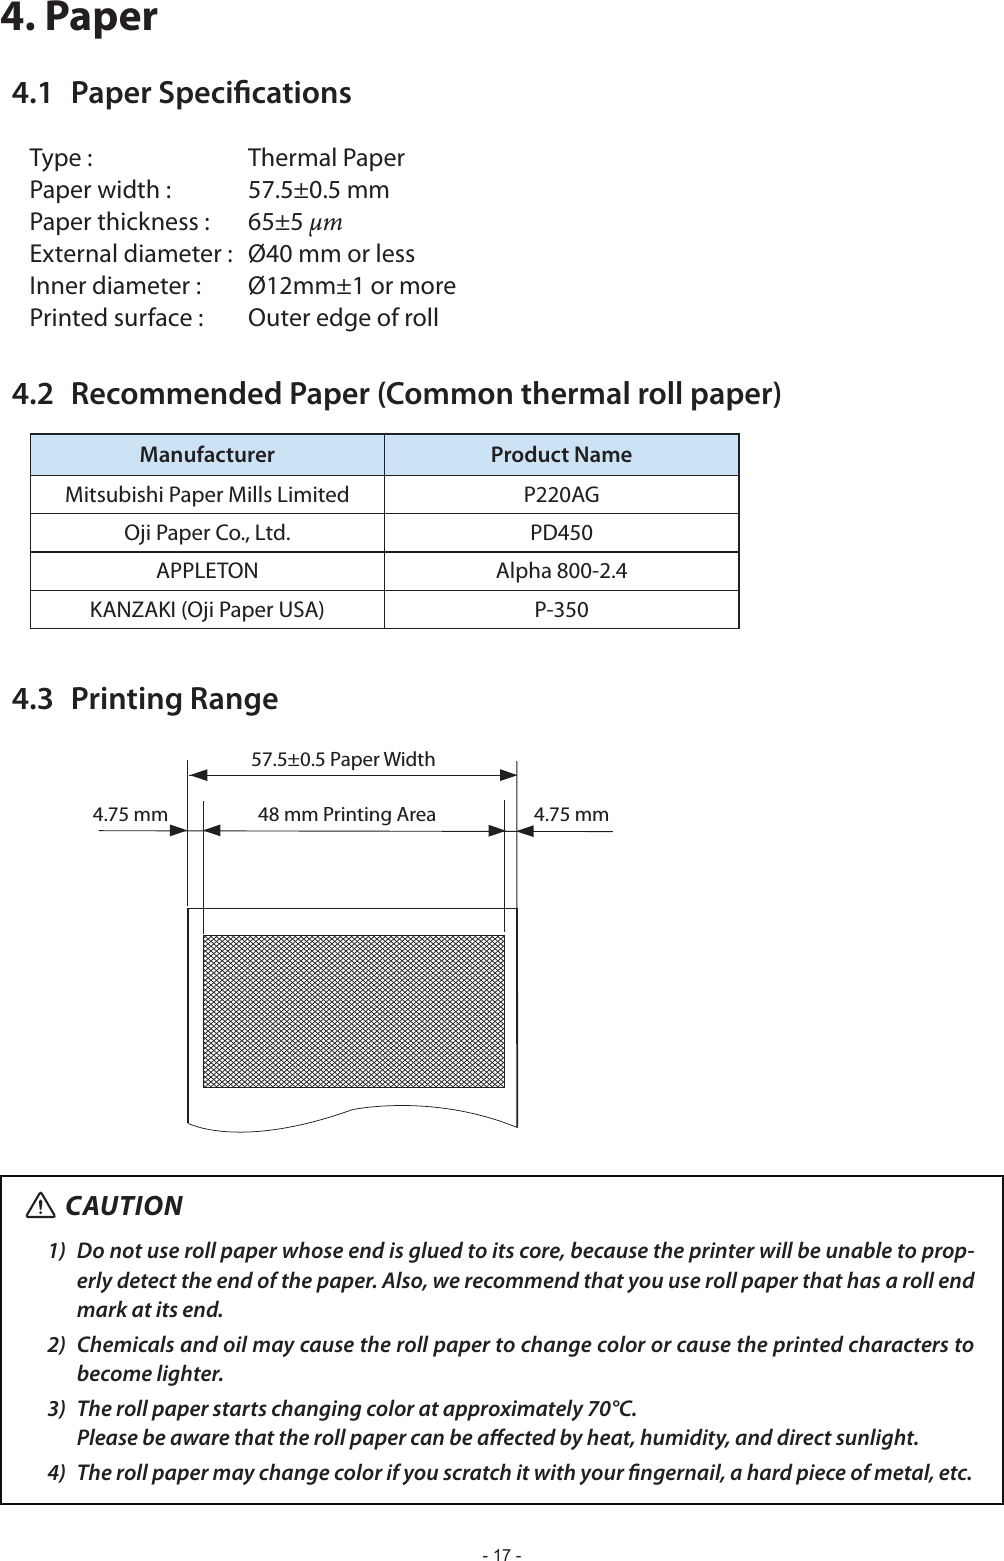 - 17 -4.2  Recommended Paper (Common thermal roll paper)Manufacturer Product NameMitsubishi Paper Mills Limited P220AGOji Paper Co., Ltd. PD450APPLETON Alpha 800-2.4KANZAKI (Oji Paper USA) P-3504.3  Printing Range4. Paper4.1  Paper SpecicationsType :       Thermal PaperPaper width :    57.5±0.5 mmPaper thickness :   65±5 µmExternal diameter :   Ø40 mm or lessInner diameter :   Ø12mm±1 or morePrinted surface :   Outer edge of rollCAUTION1)  Do not use roll paper whose end is glued to its core, because the printer will be unable to prop-erly detect the end of the paper. Also, we recommend that you use roll paper that has a roll end mark at its end.2)  Chemicals and oil may cause the roll paper to change color or cause the printed characters to become lighter.3)  The roll paper starts changing color at approximately 70°C.  Please be aware that the roll paper can be aected by heat, humidity, and direct sunlight.4)  The roll paper may change color if you scratch it with your ngernail, a hard piece of metal, etc.4.75 mm4.75 mm 48 mm Printing Area57.5±0.5 Paper Width